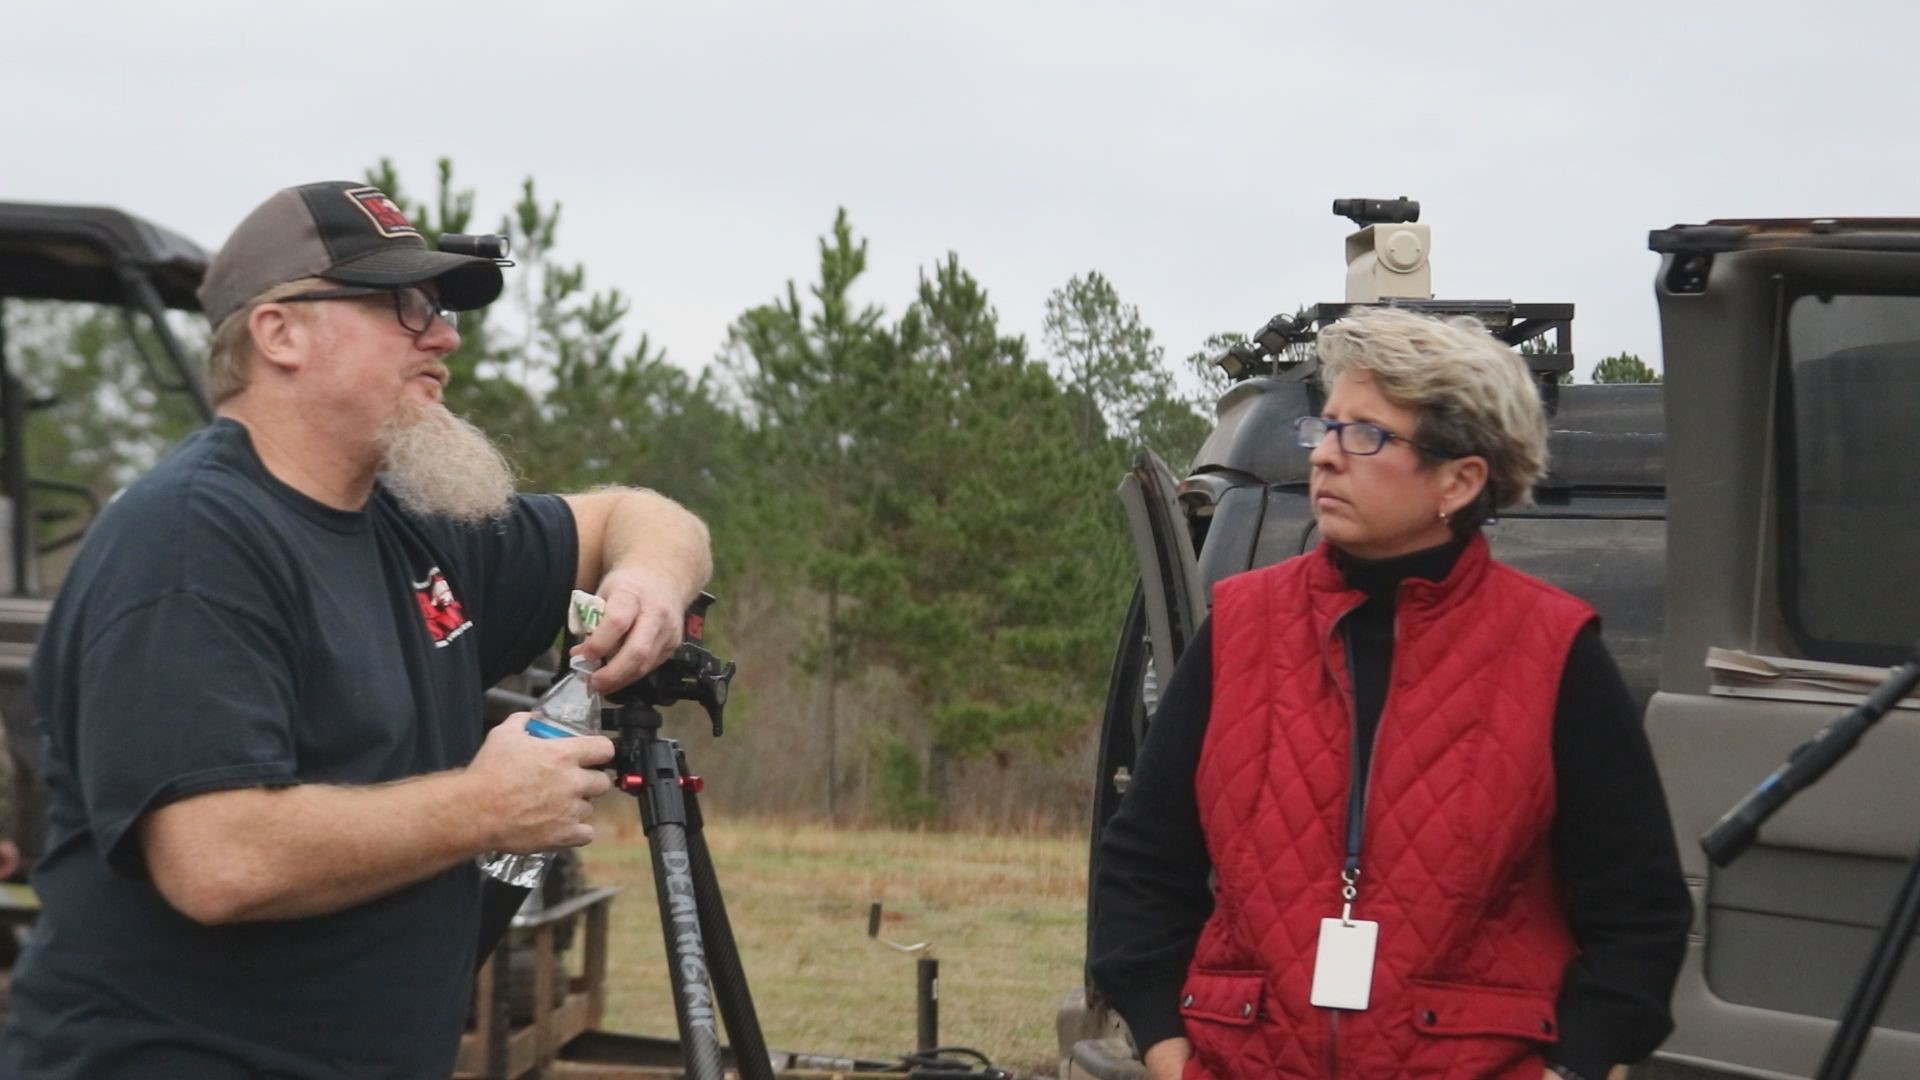 Hog S.W.A.T. specializes in guided, high-tech hog hunts using thermal optics, and you get to hold the AK-47.